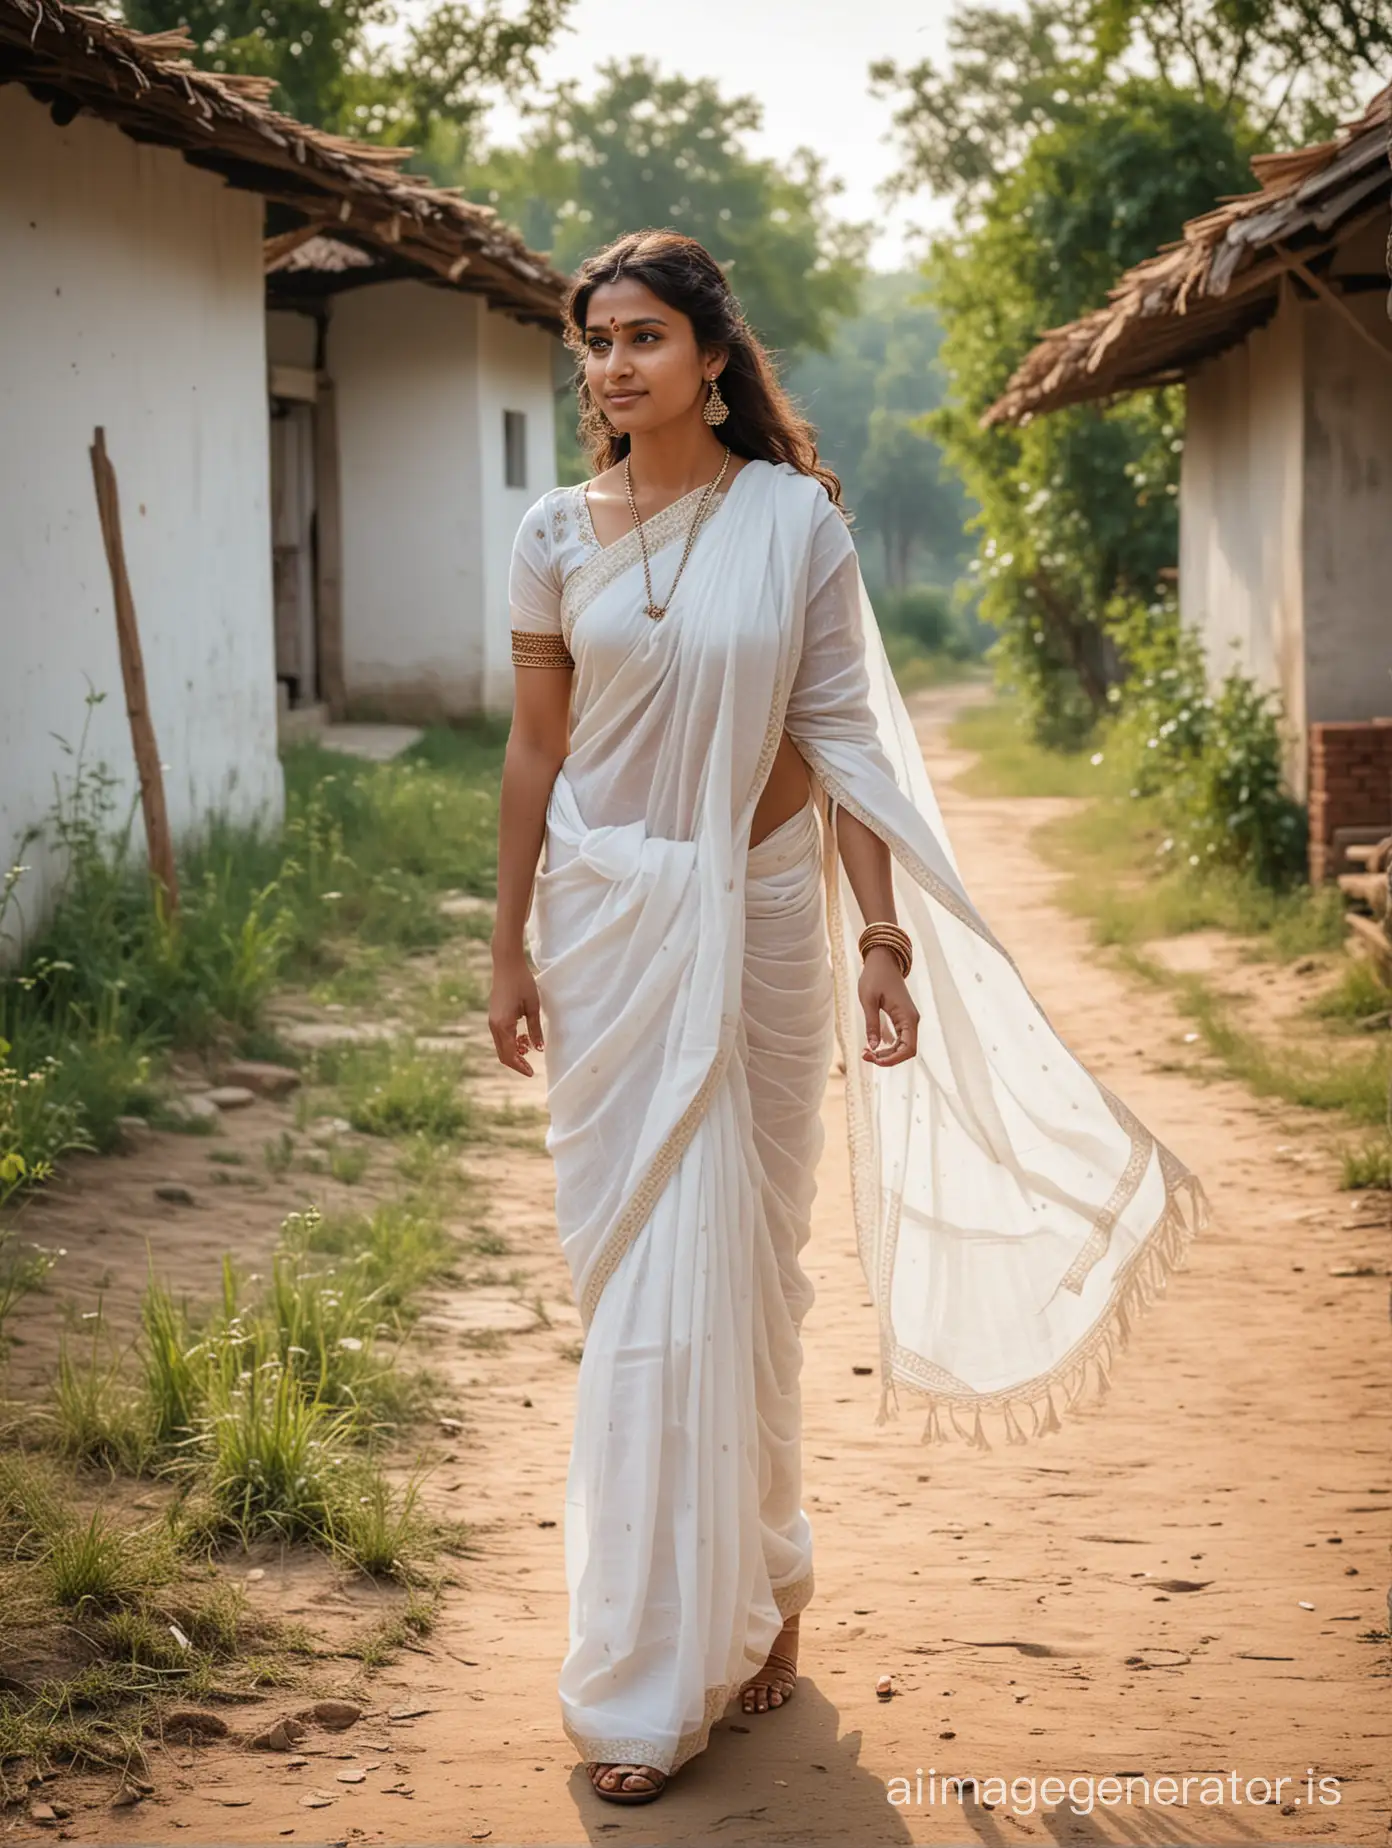 A photo of michela an indian prosperous village woman just came back home from village with white saree. Wide full view shot.